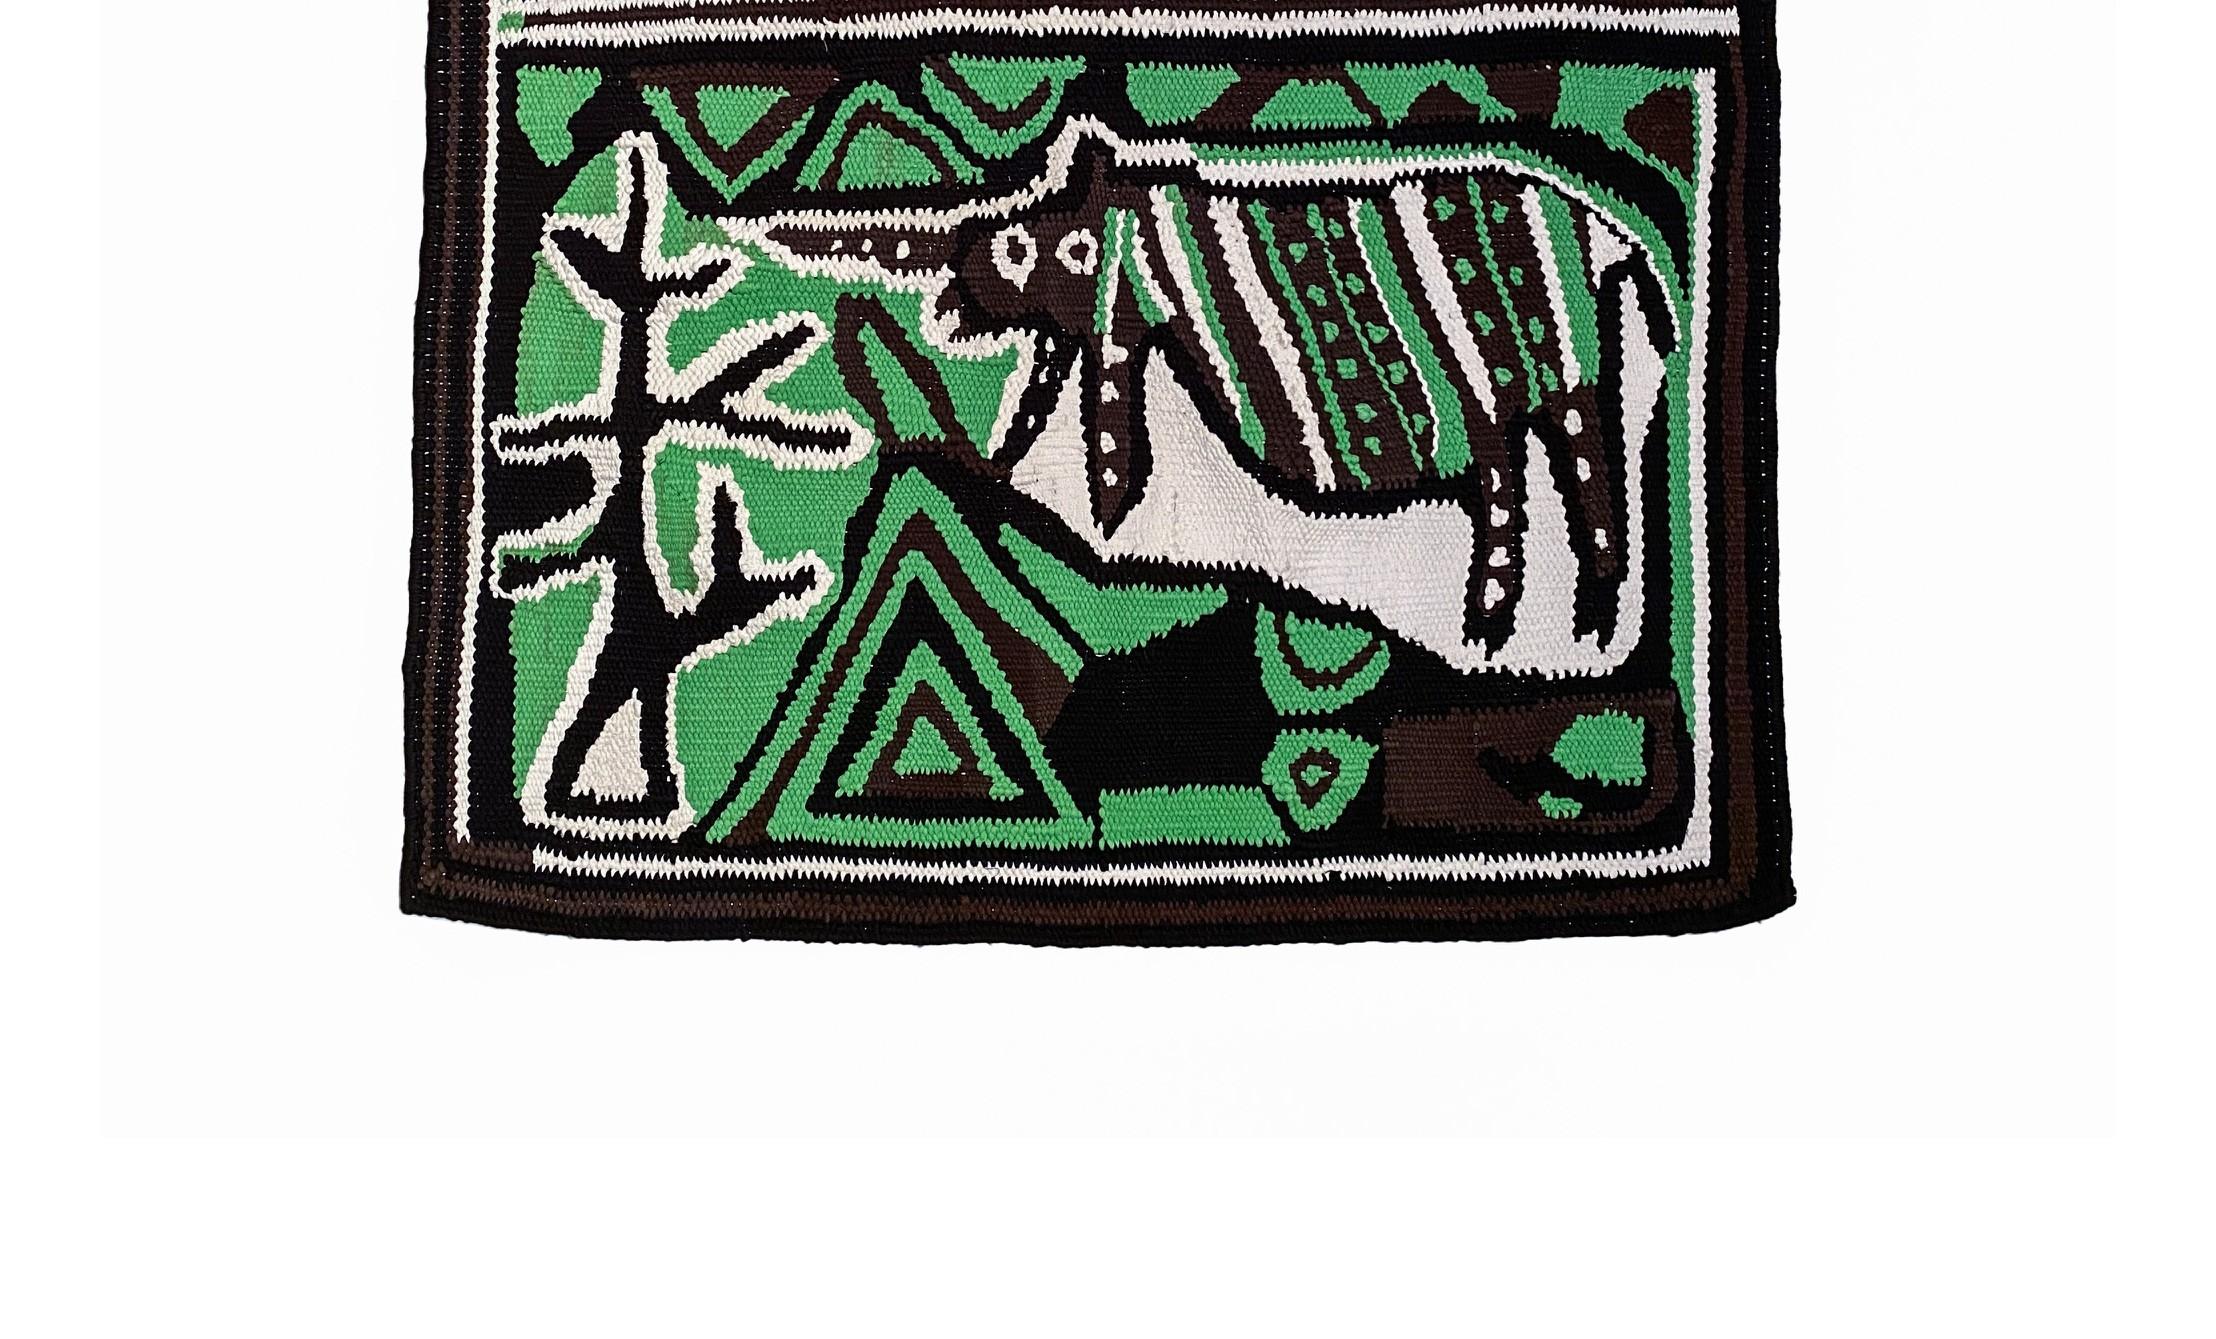 South African Animal Isolation Rug, 1 of 1 by Nawaaz Saldulker